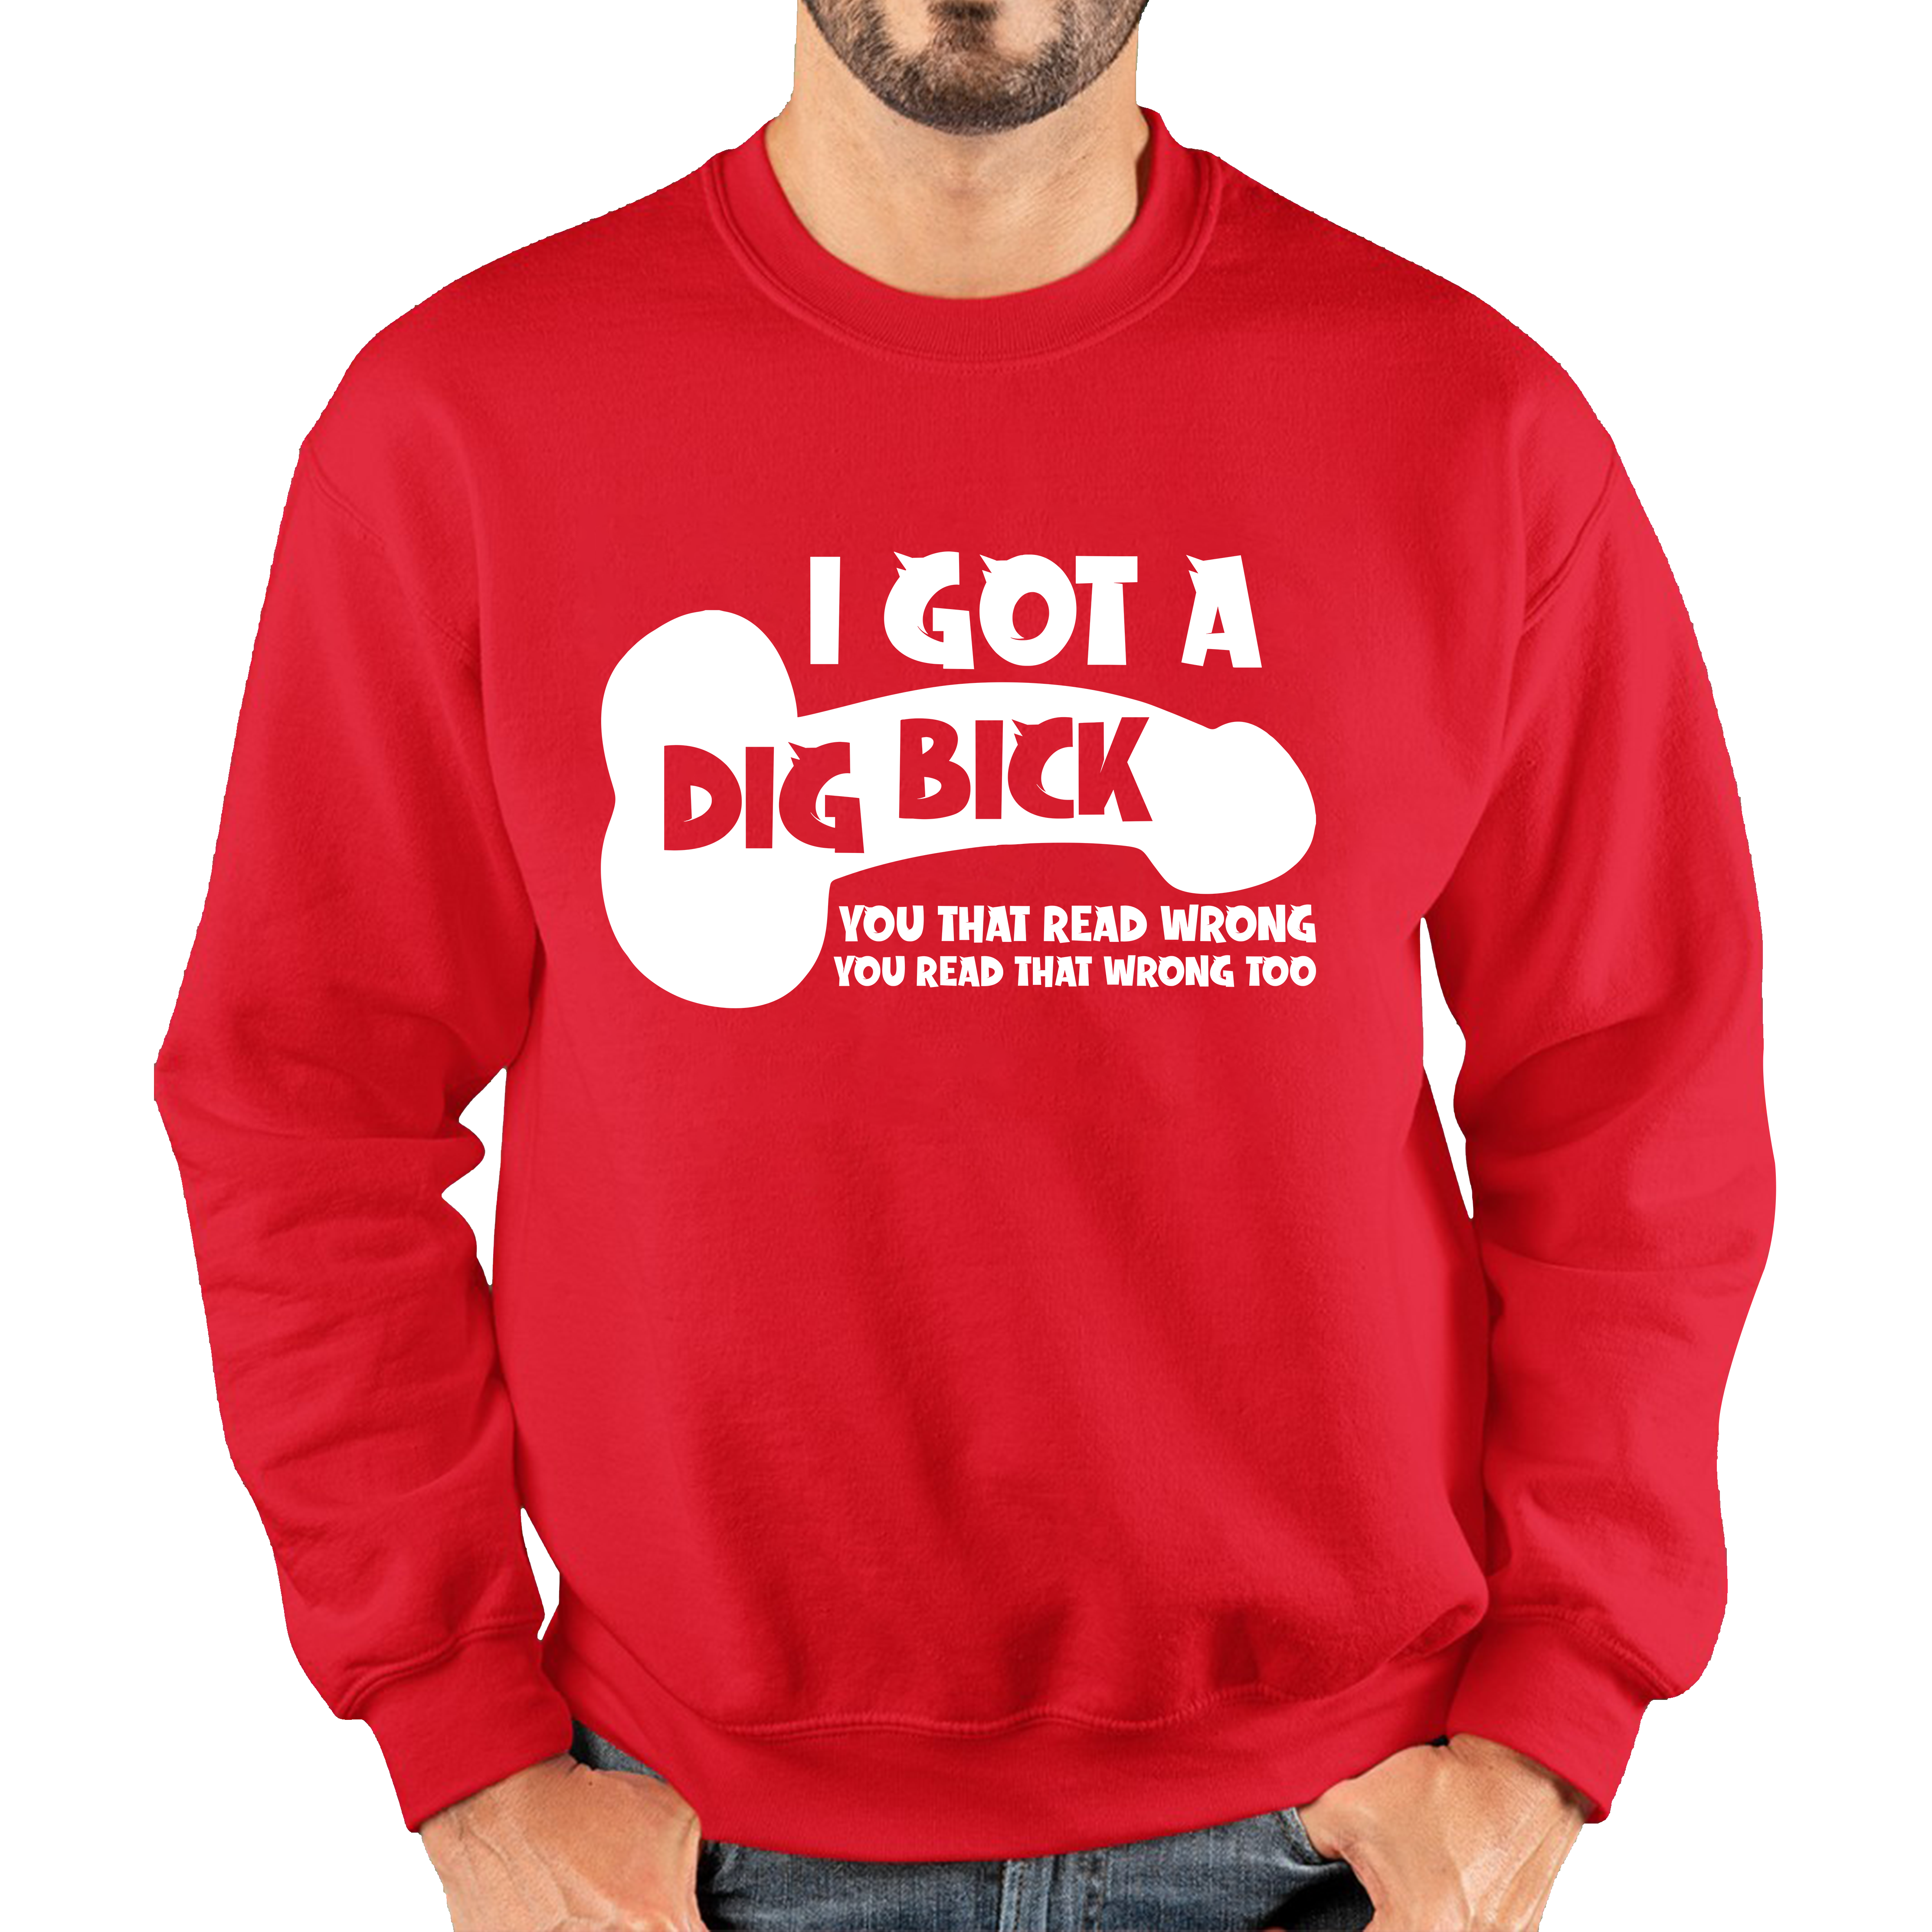 I Got A Dig Bick You That Read Wrong You Read That Wrong Too Funny Novelty Sarcastic Humour Unisex Sweatshirt